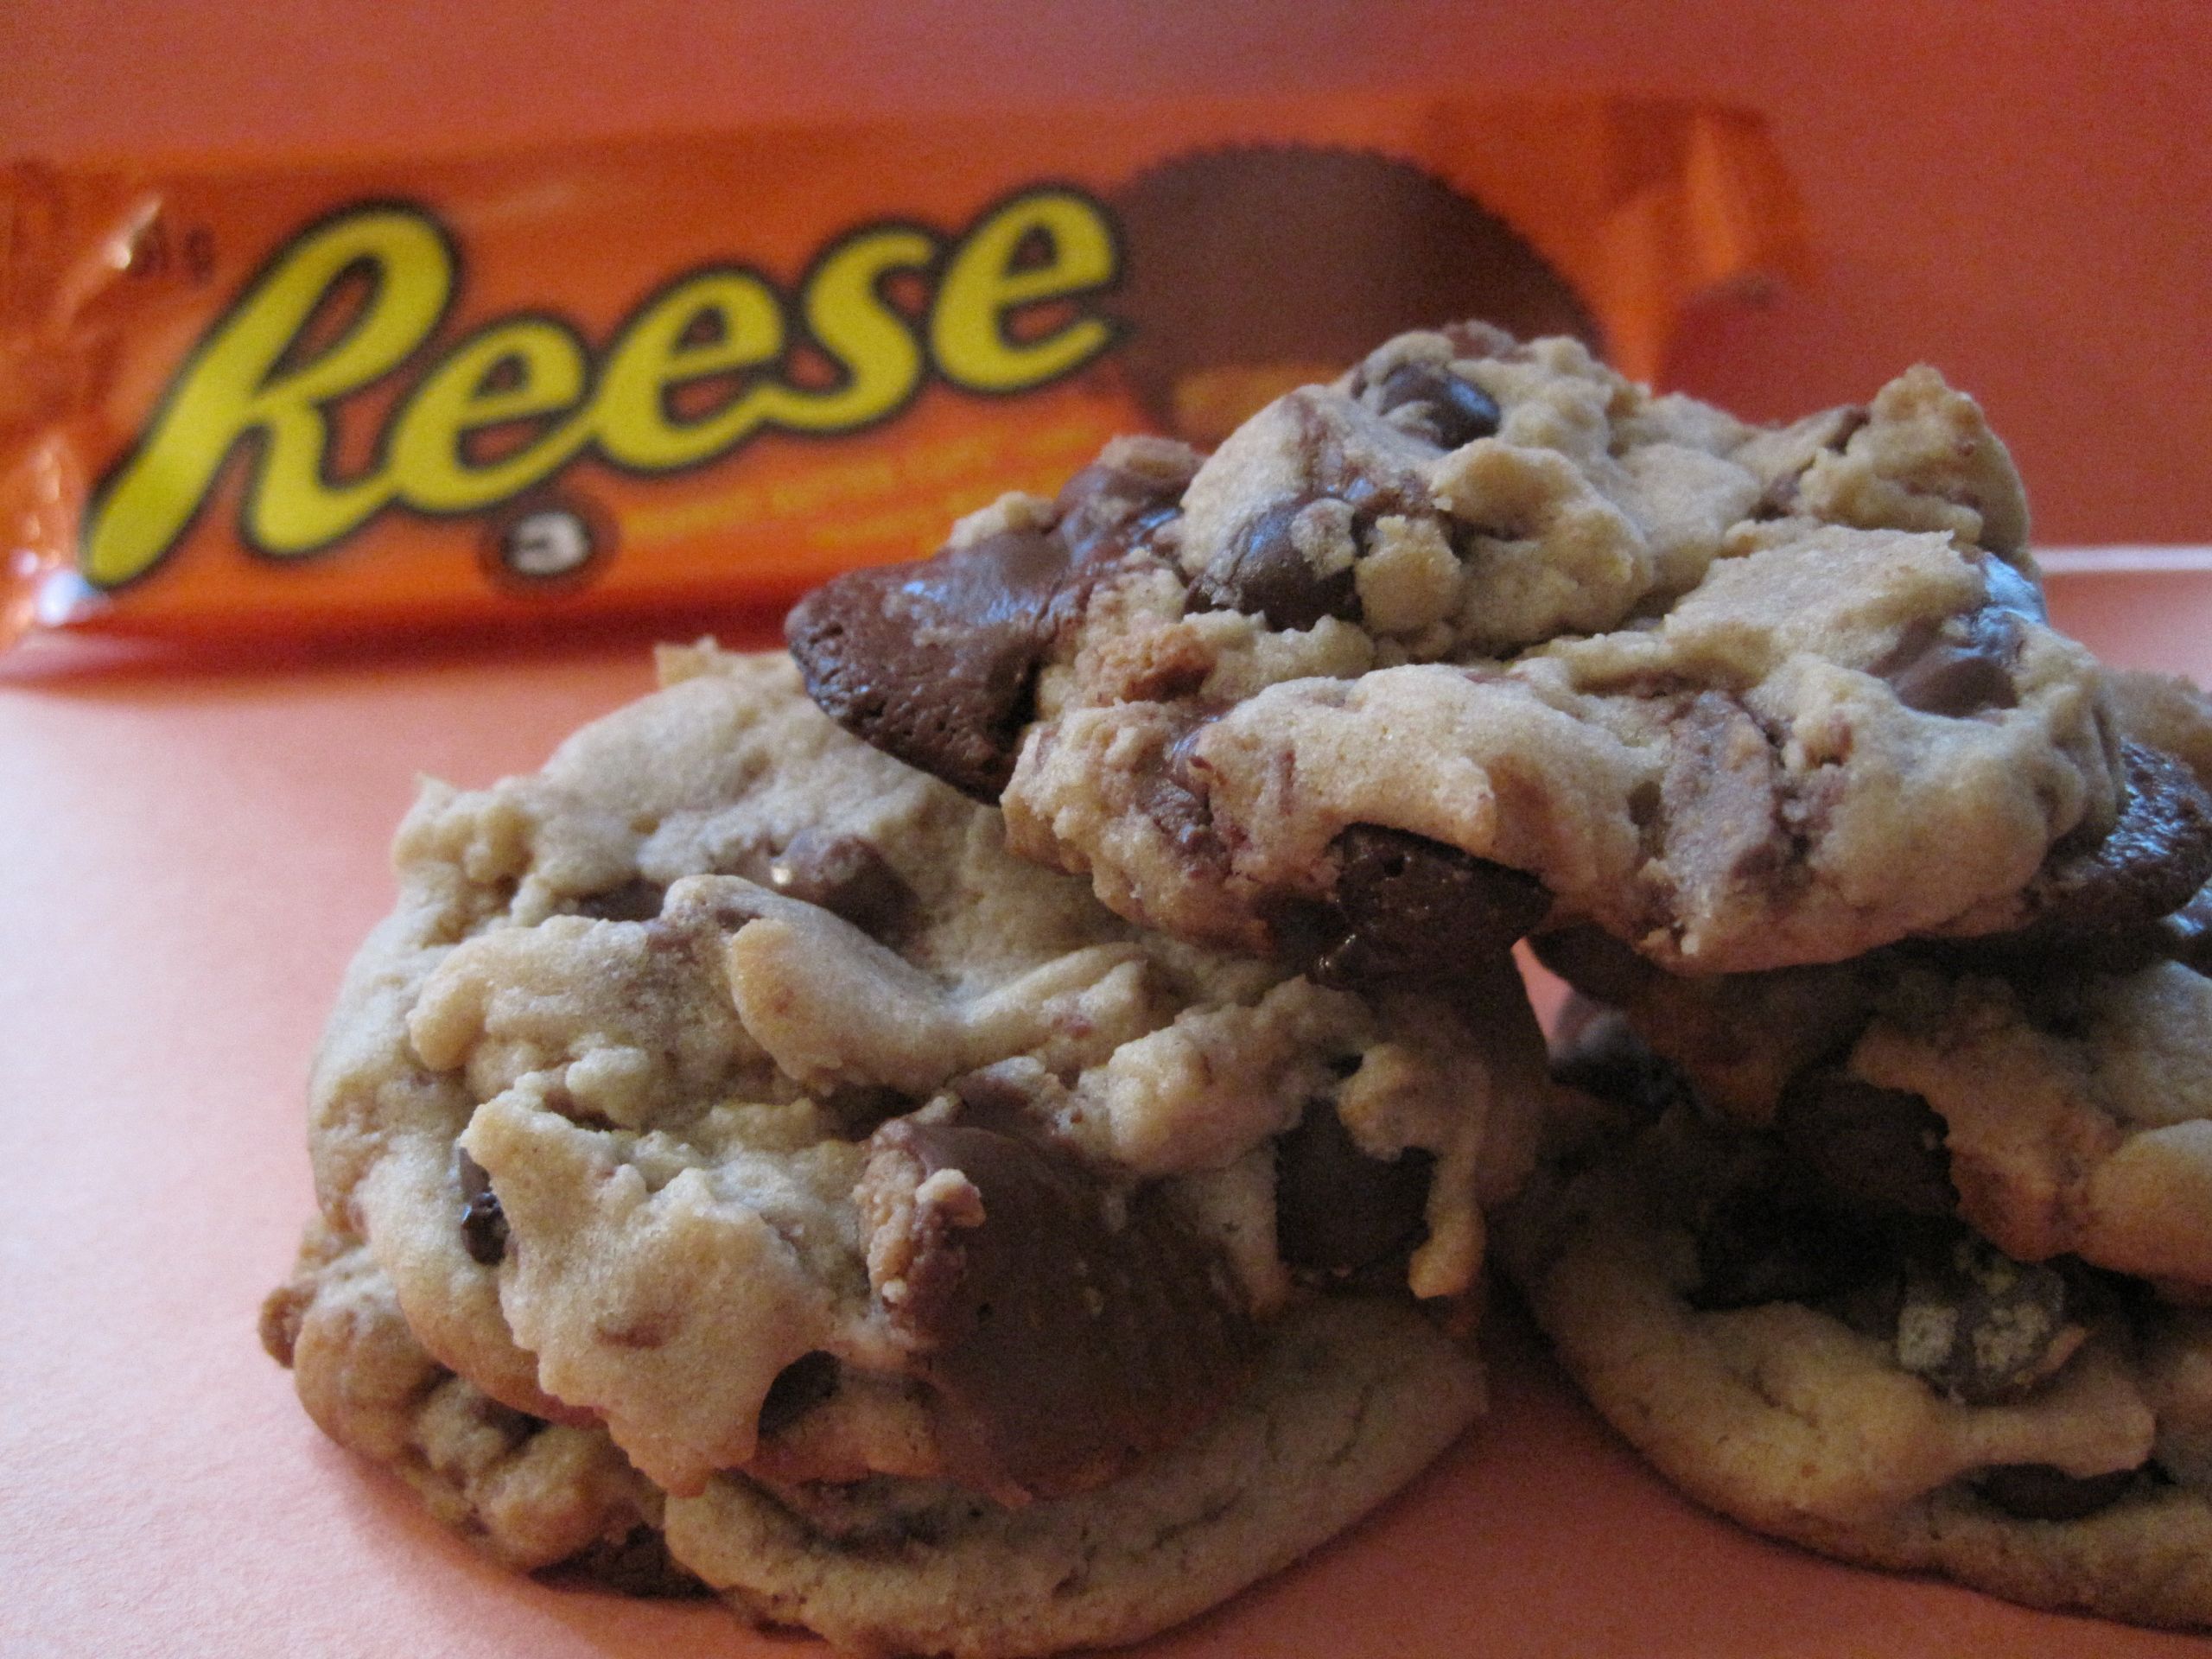 Reese Peanut Butter Cup Cookies
 Reese’s Peanut Butter Cup Cookies – Warm Vanilla Sugar